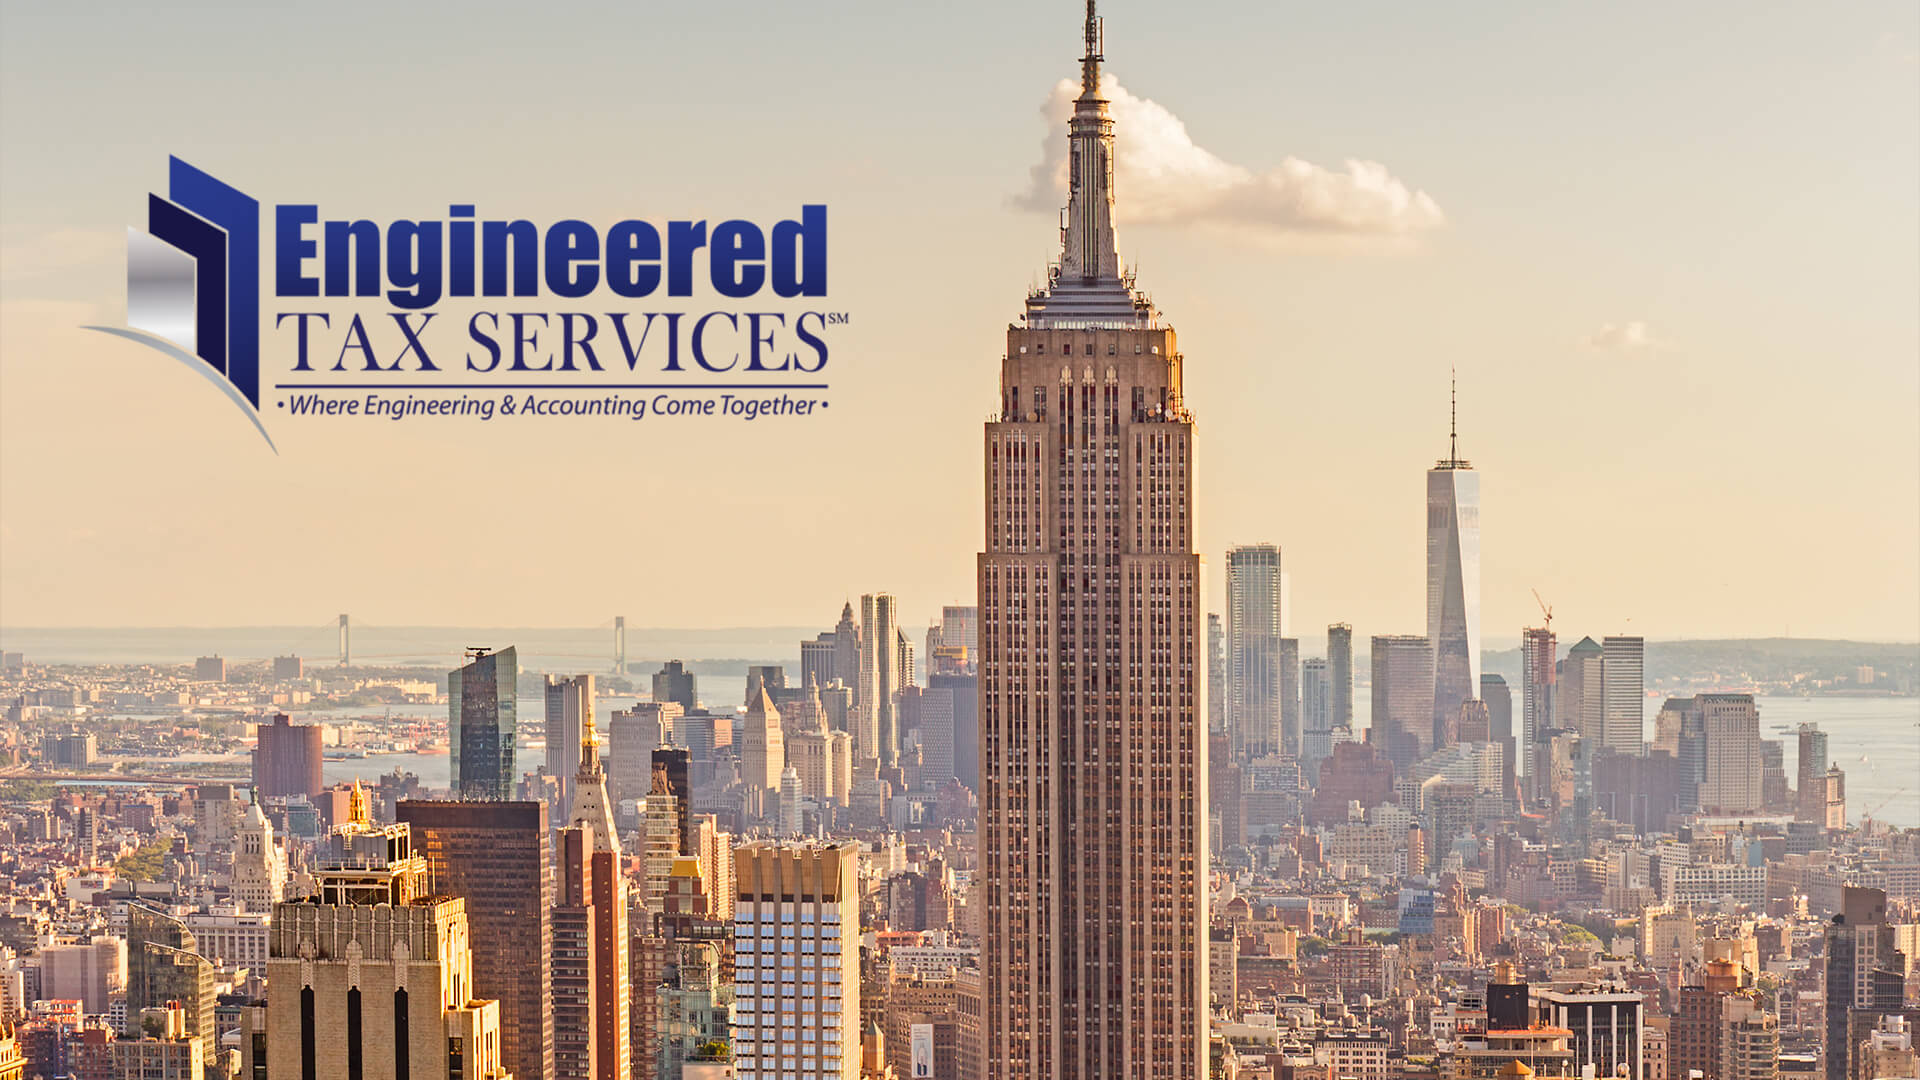 engineered tax services